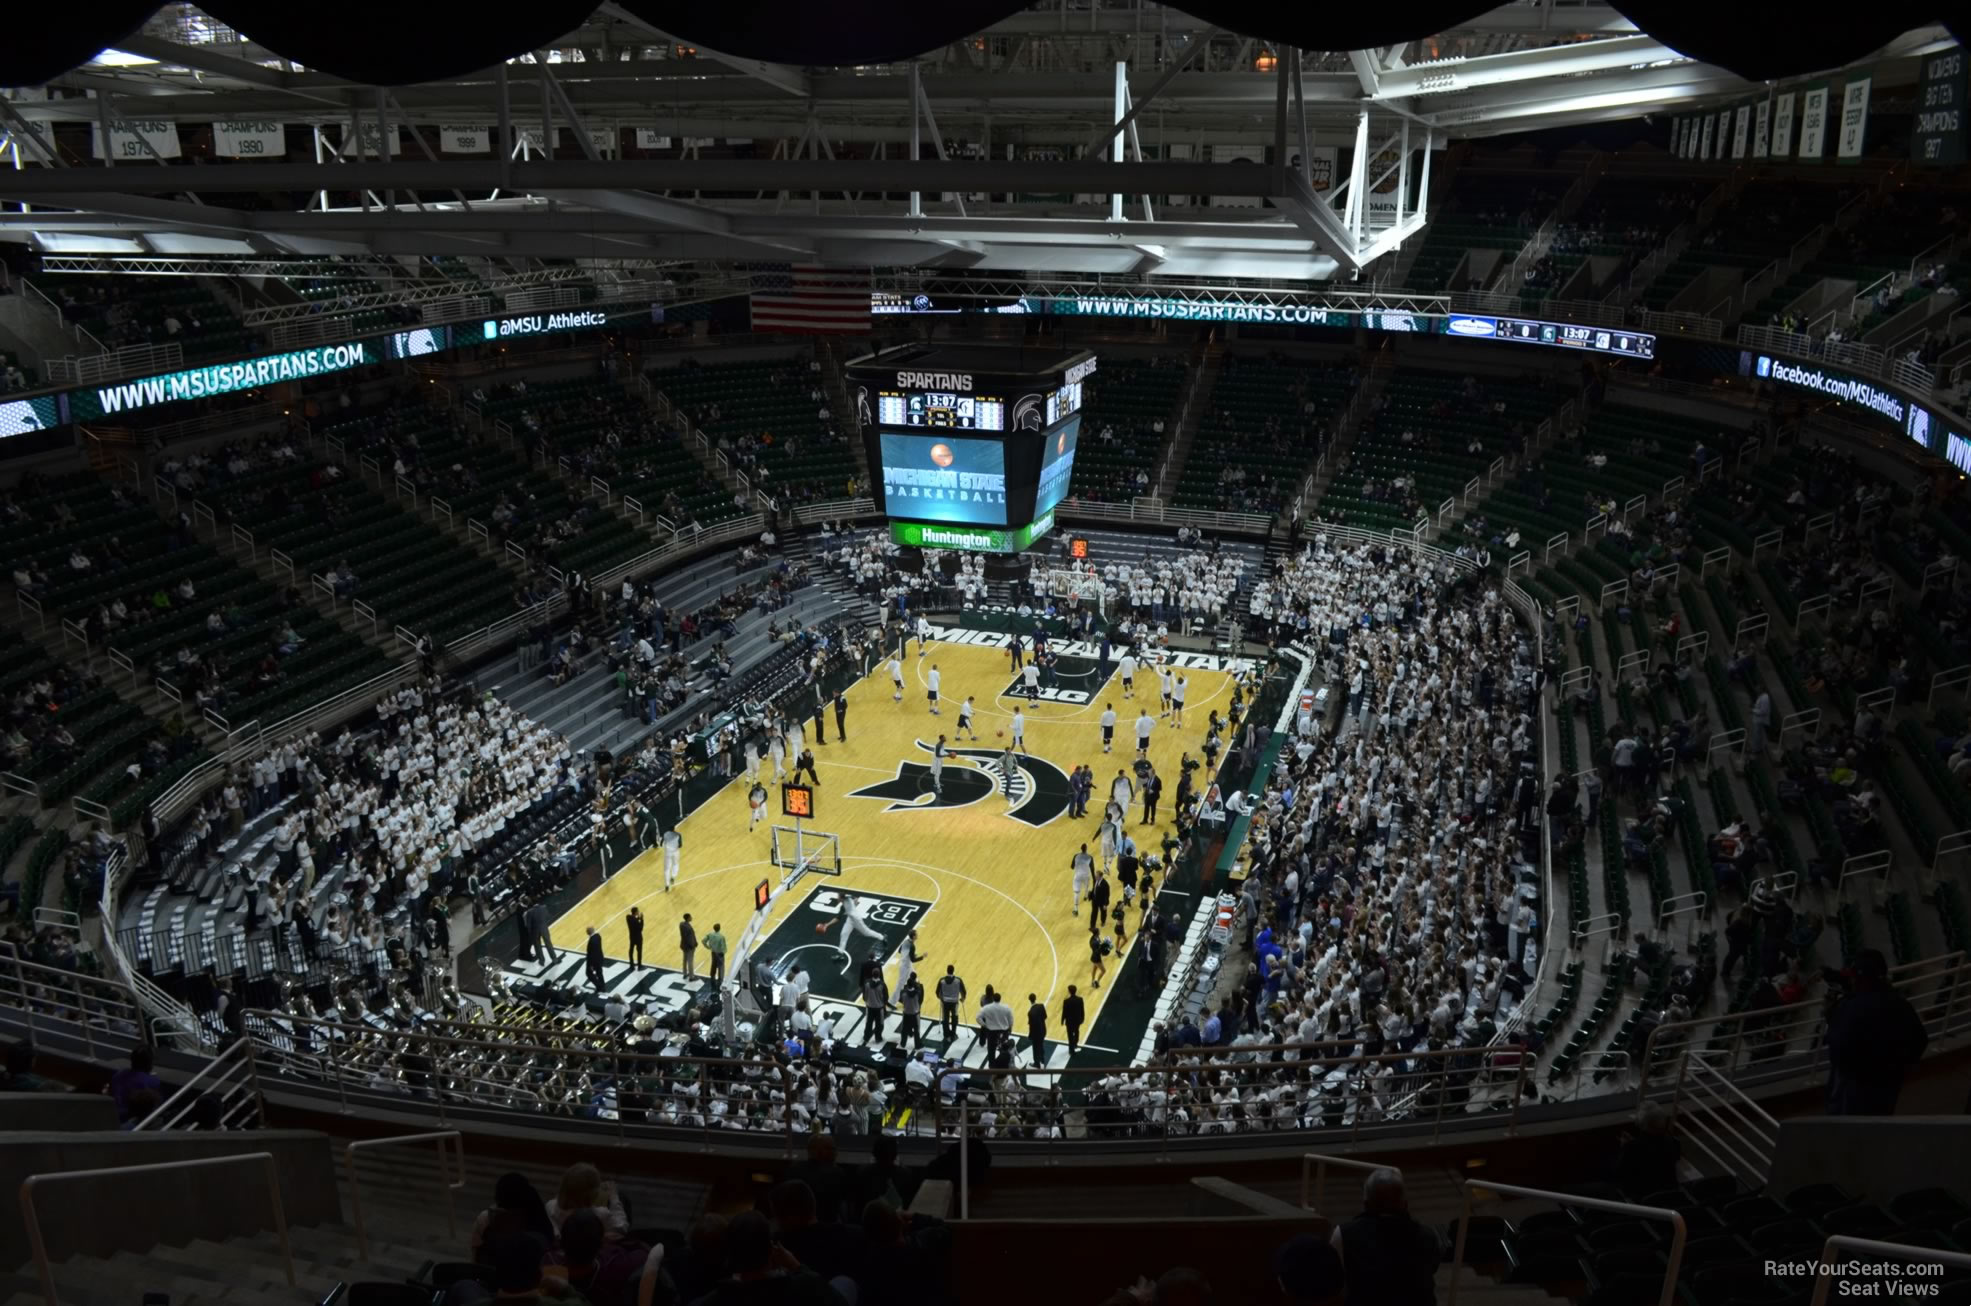 section 216, row 15 seat view  - breslin center